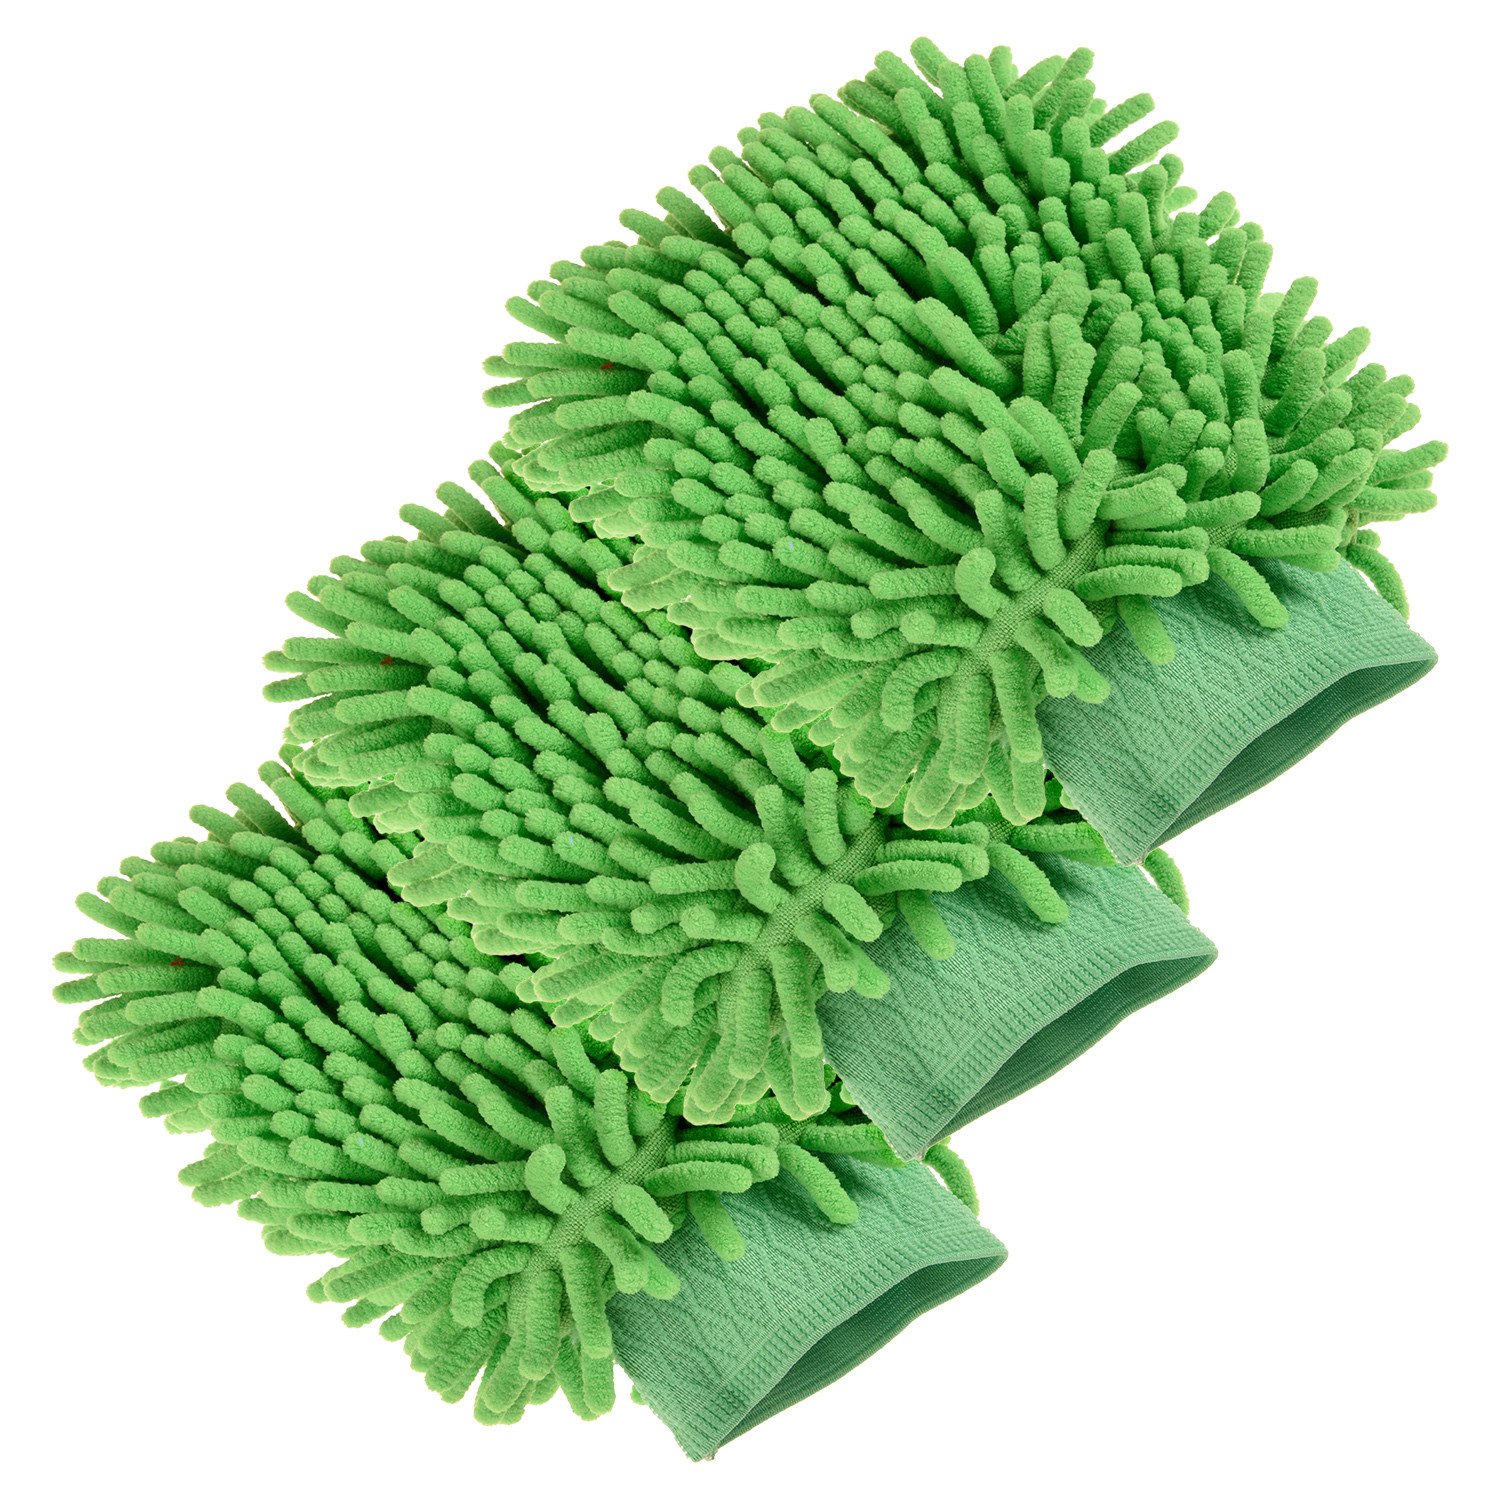 Kuber Industries Chenille Mitts|Microfiber Cleaning Gloves|Inside Waterproof Cloth Gloves|100 Gram Weighted Hand Duster|Hand Chenille Gloves For Car|Glass (Green)